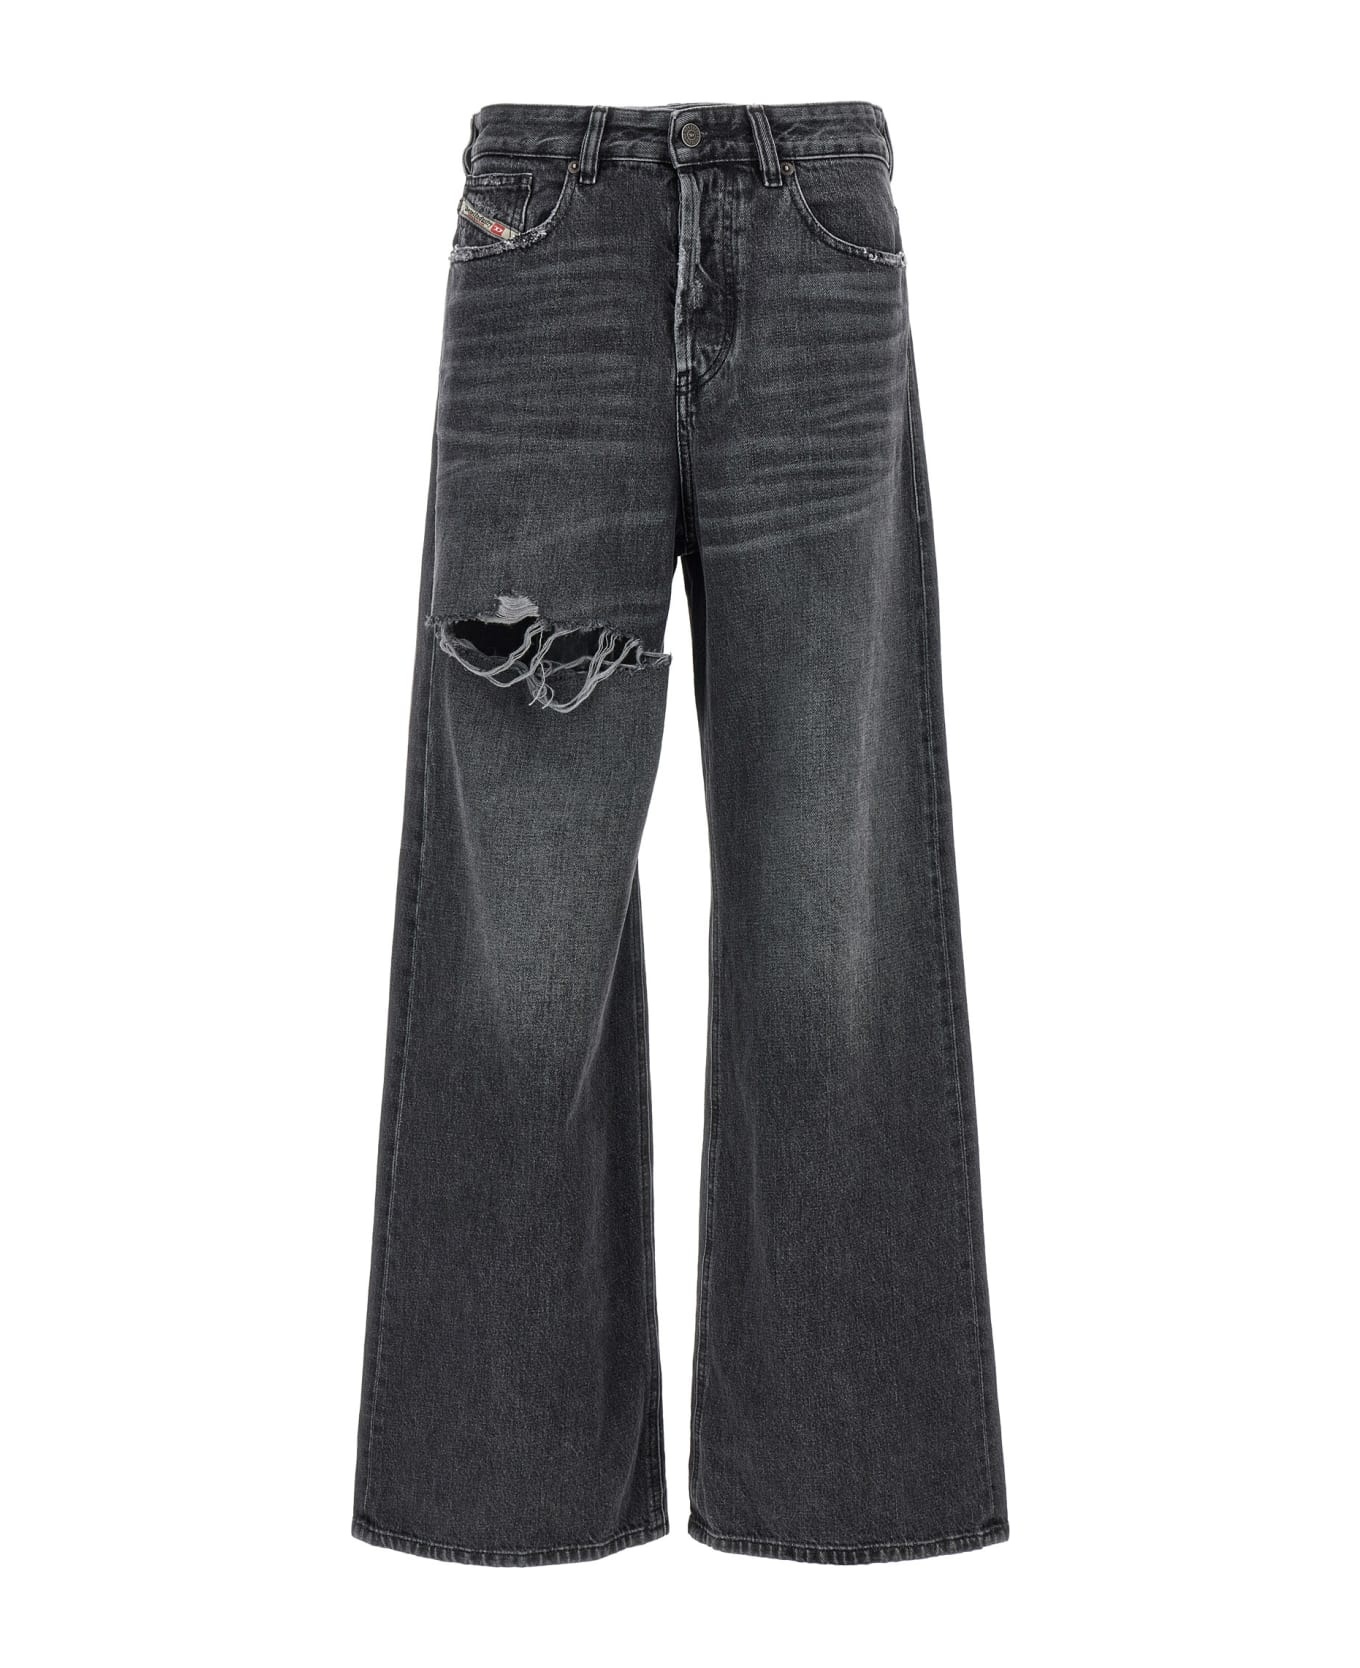 '1996 D-sire' Jeans - 1